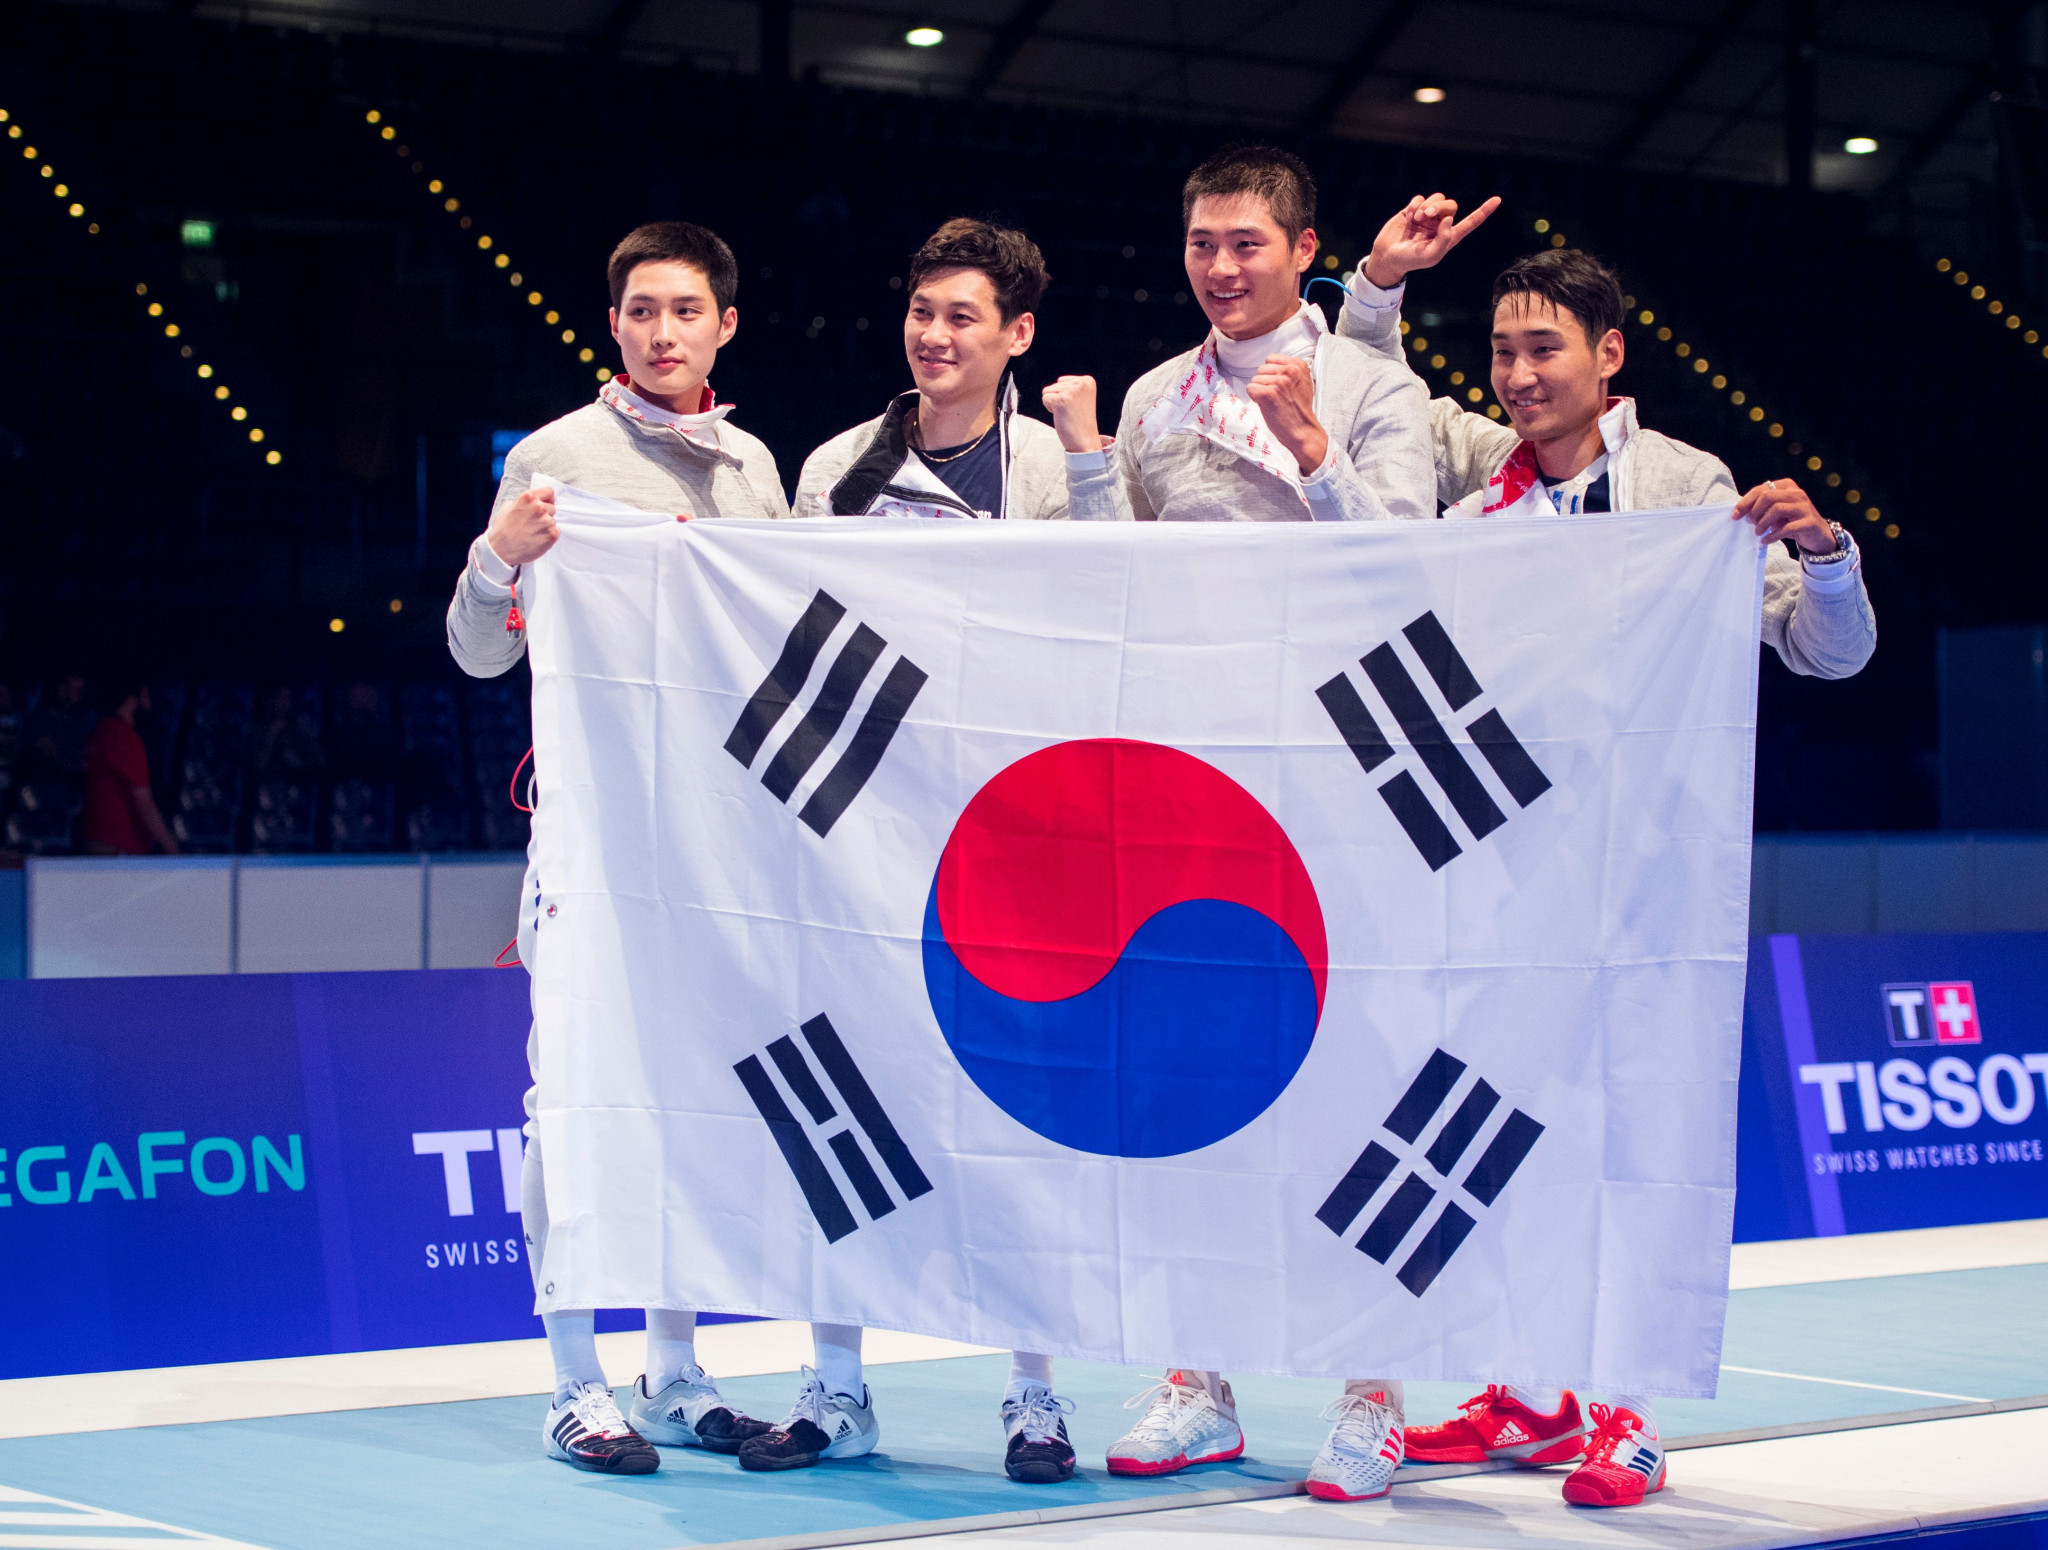 South Korea's men have won gold in the team foil event at the Asian Fencing Championships, having also won gold in the team sabre event at last year's World Championships ©Getty Images